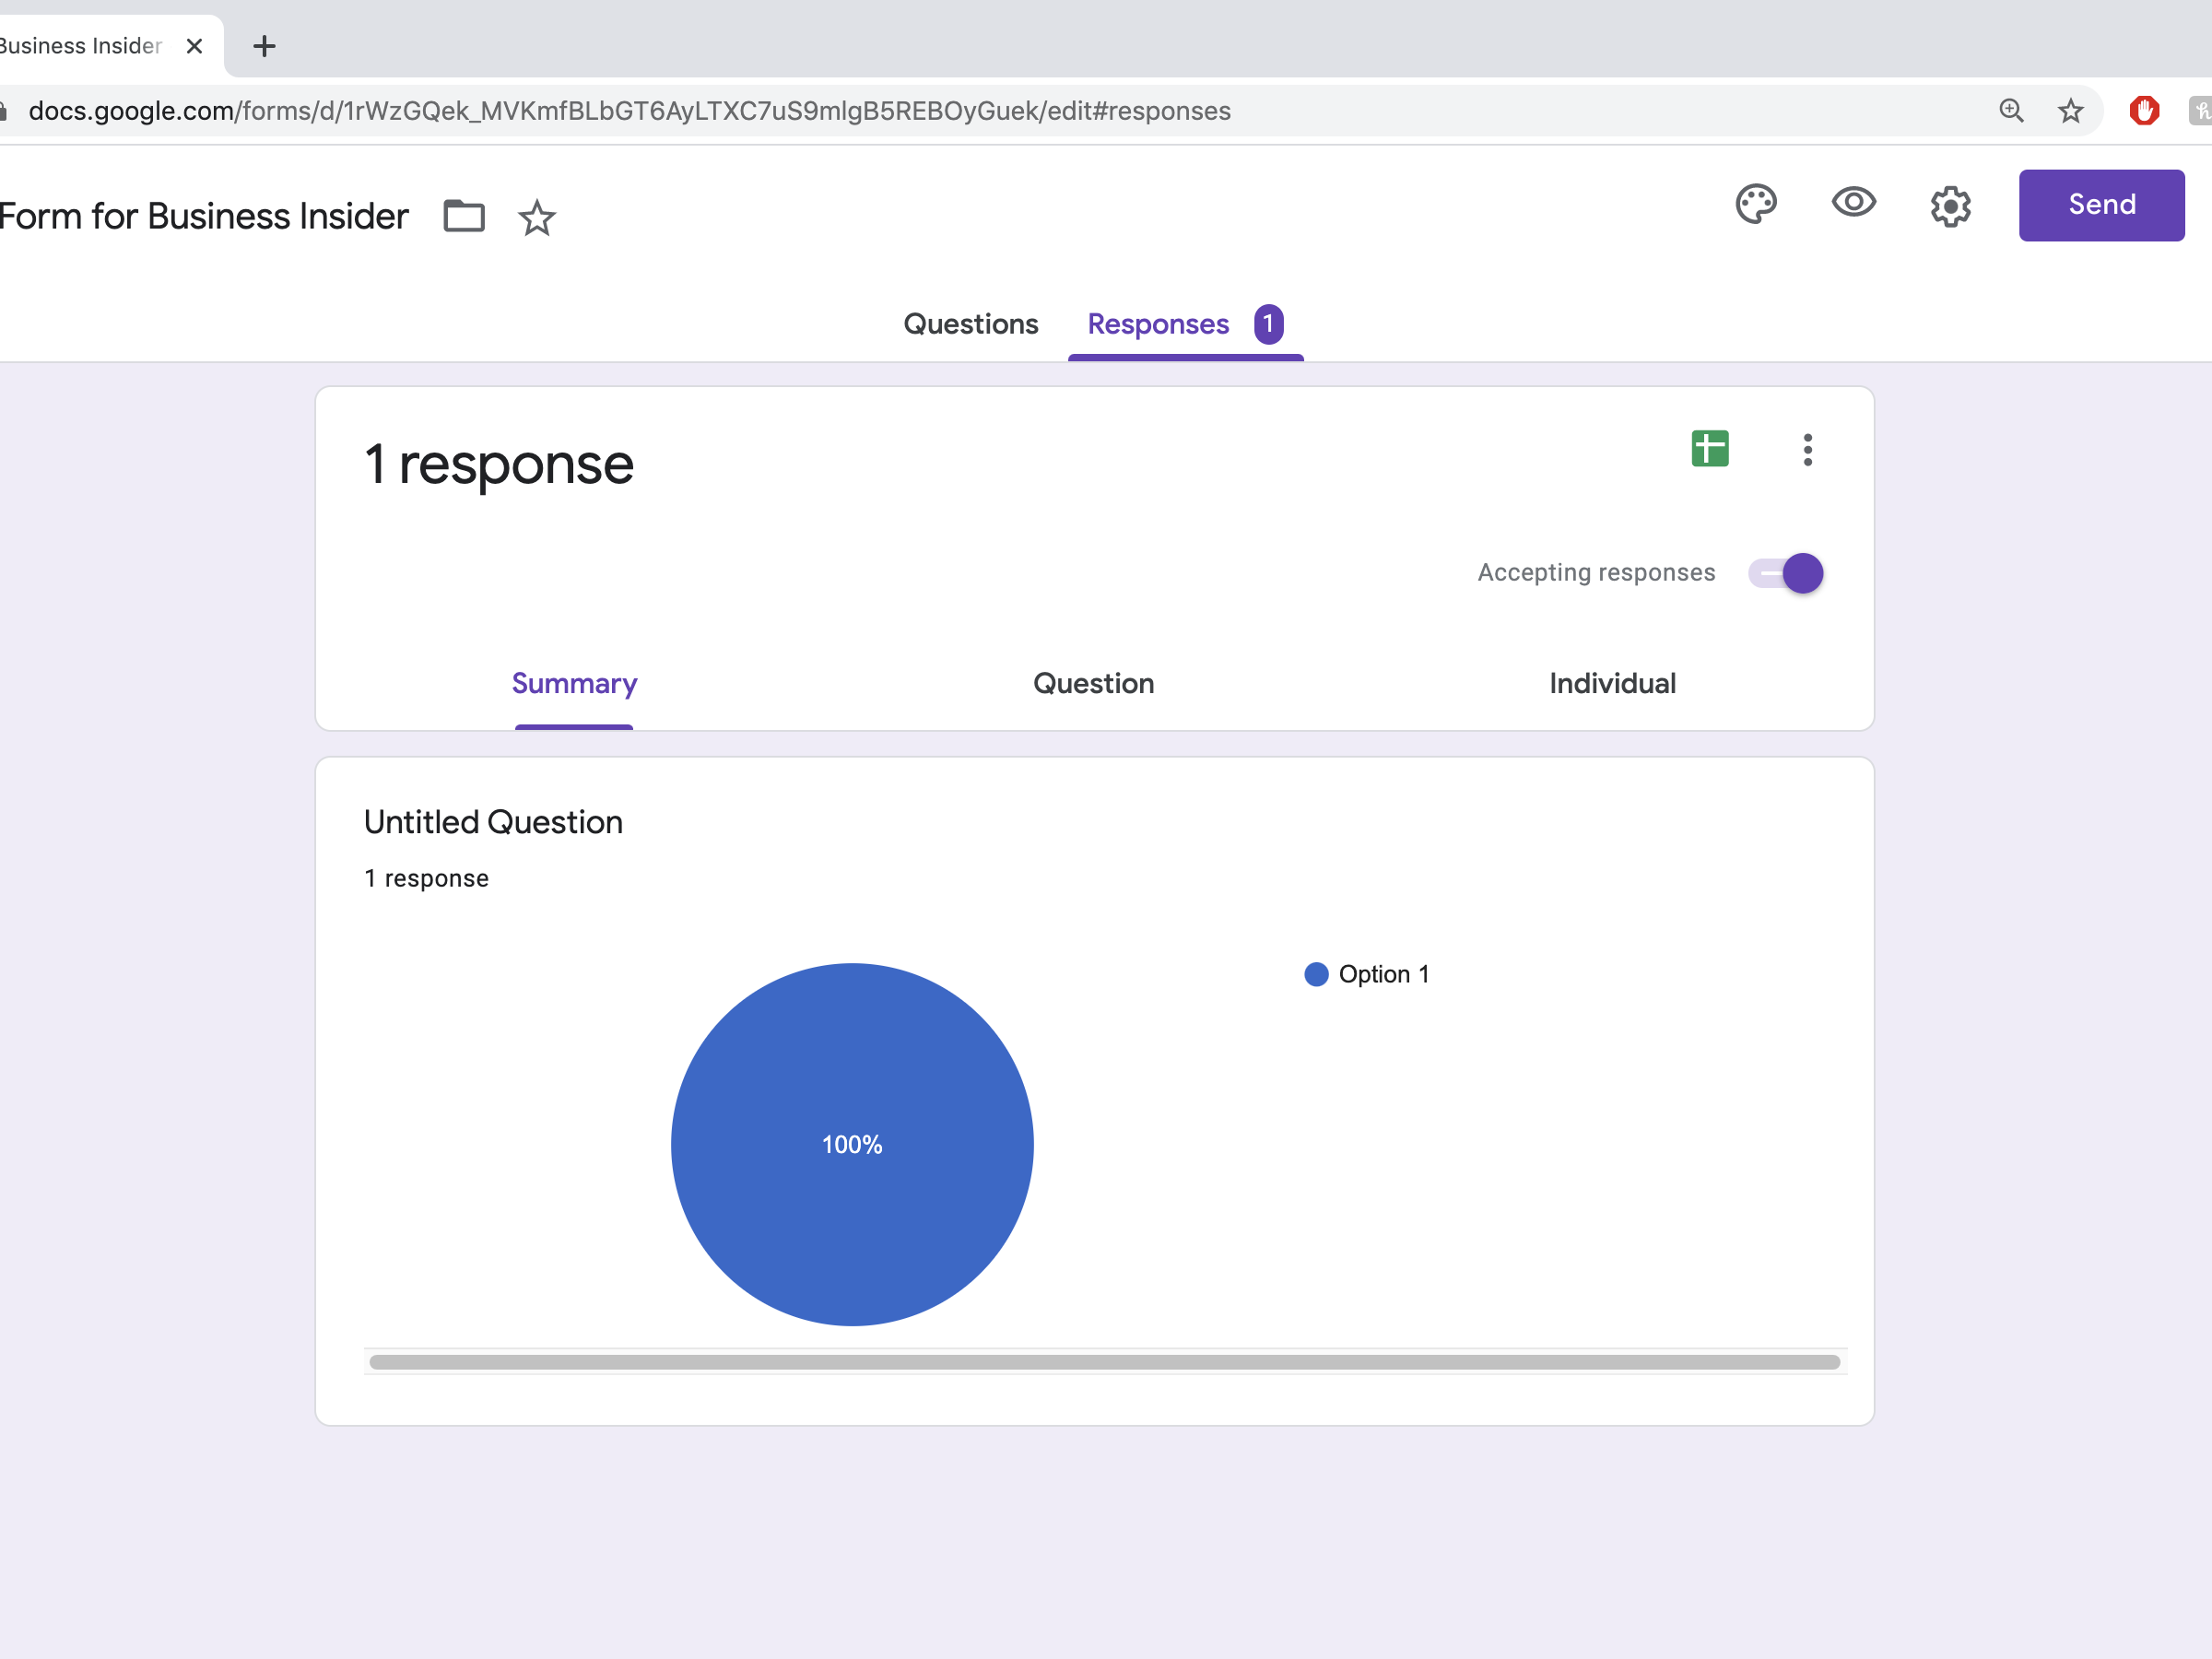 Are Google Forms anonymous? Here's how to enable anonymous responses